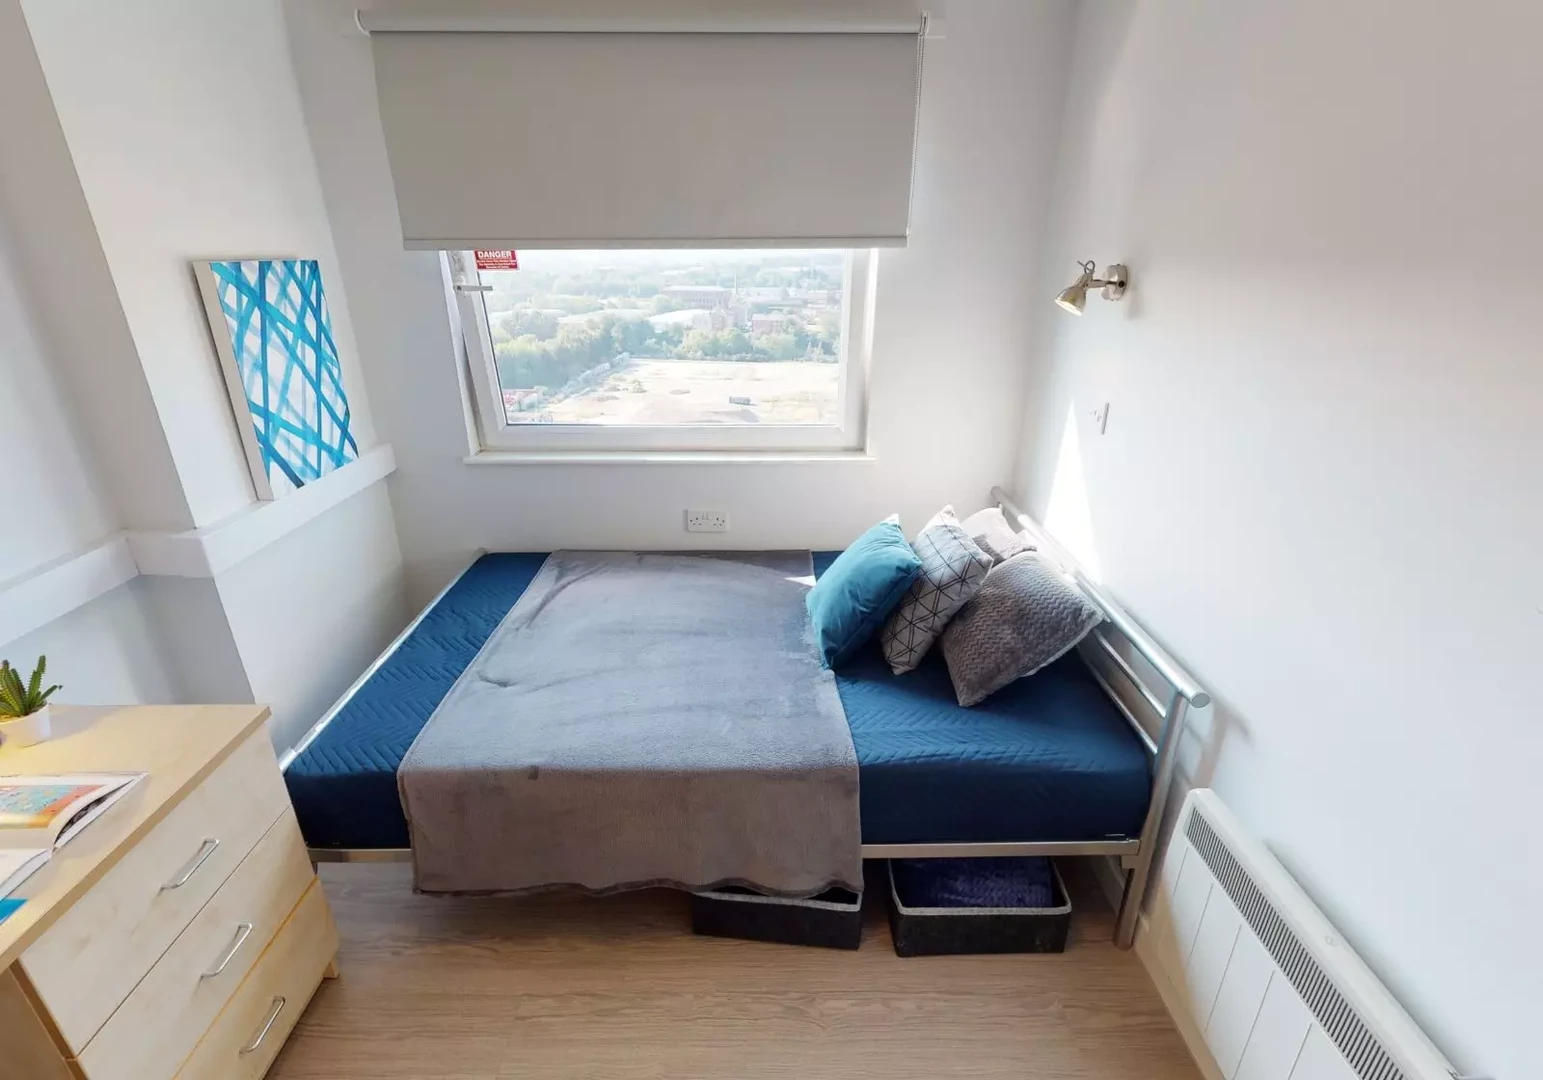 Room for rent in a shared flat in Leeds